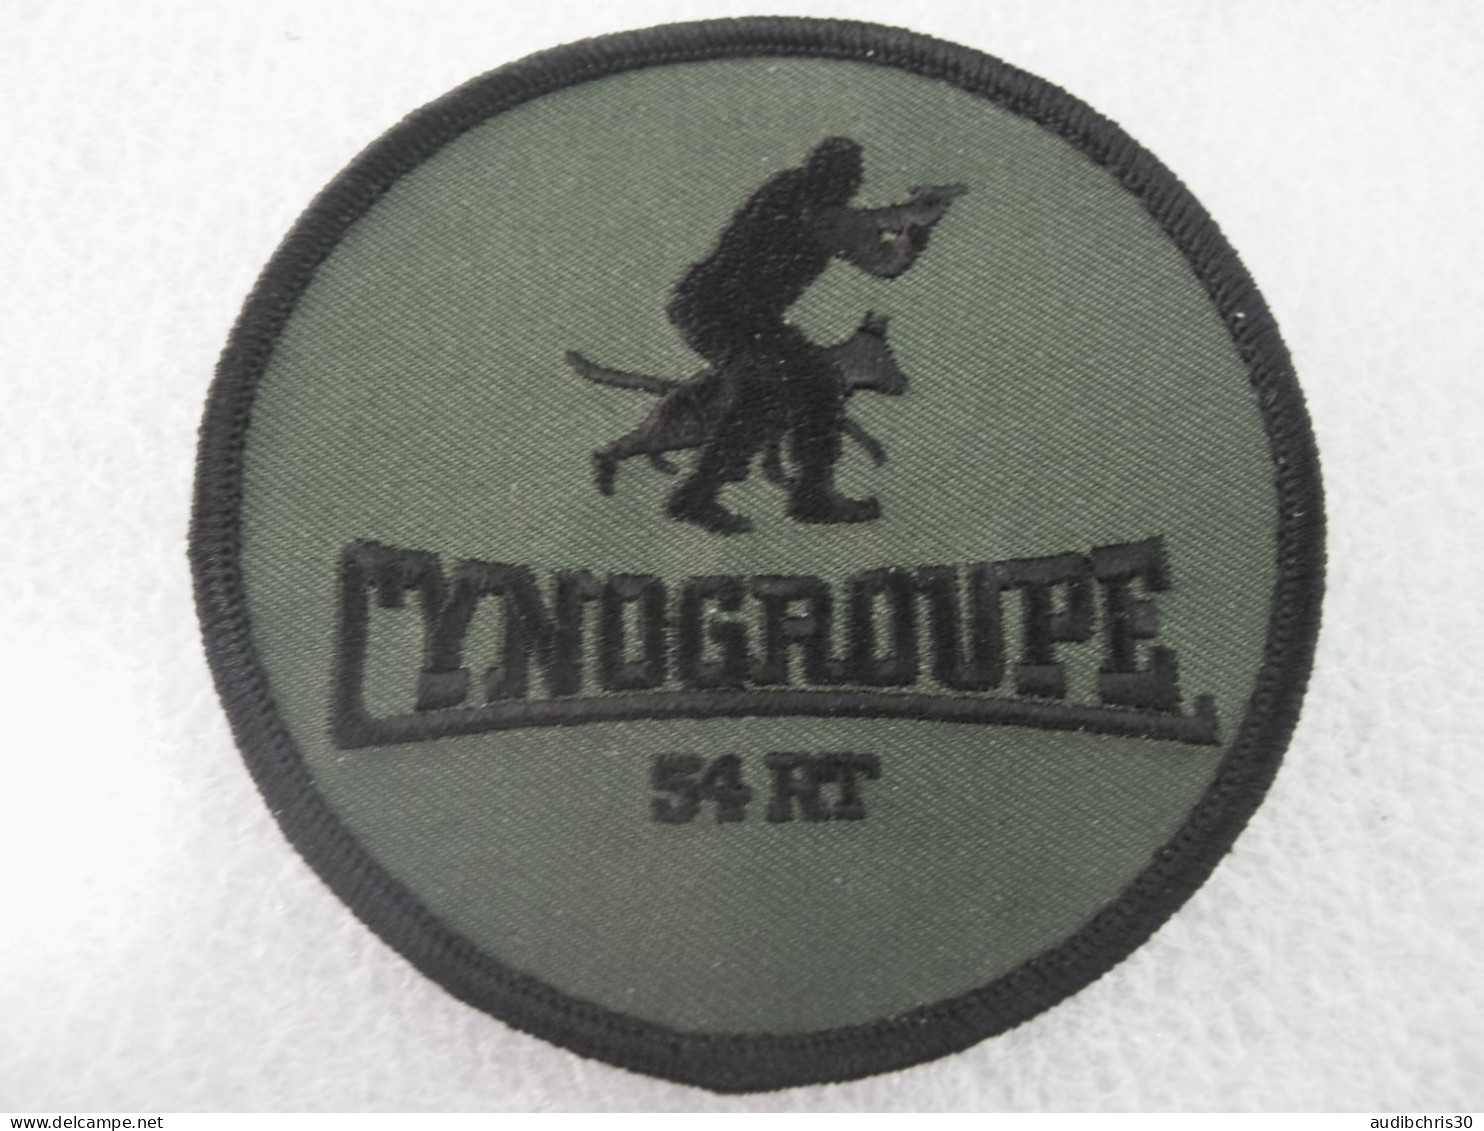 ECUSSON TRANSMISSIONS 54° RT LE GROUPE CYNOPHILE CYNOGROUPE OPEX SCRATCH 90MM - Heer